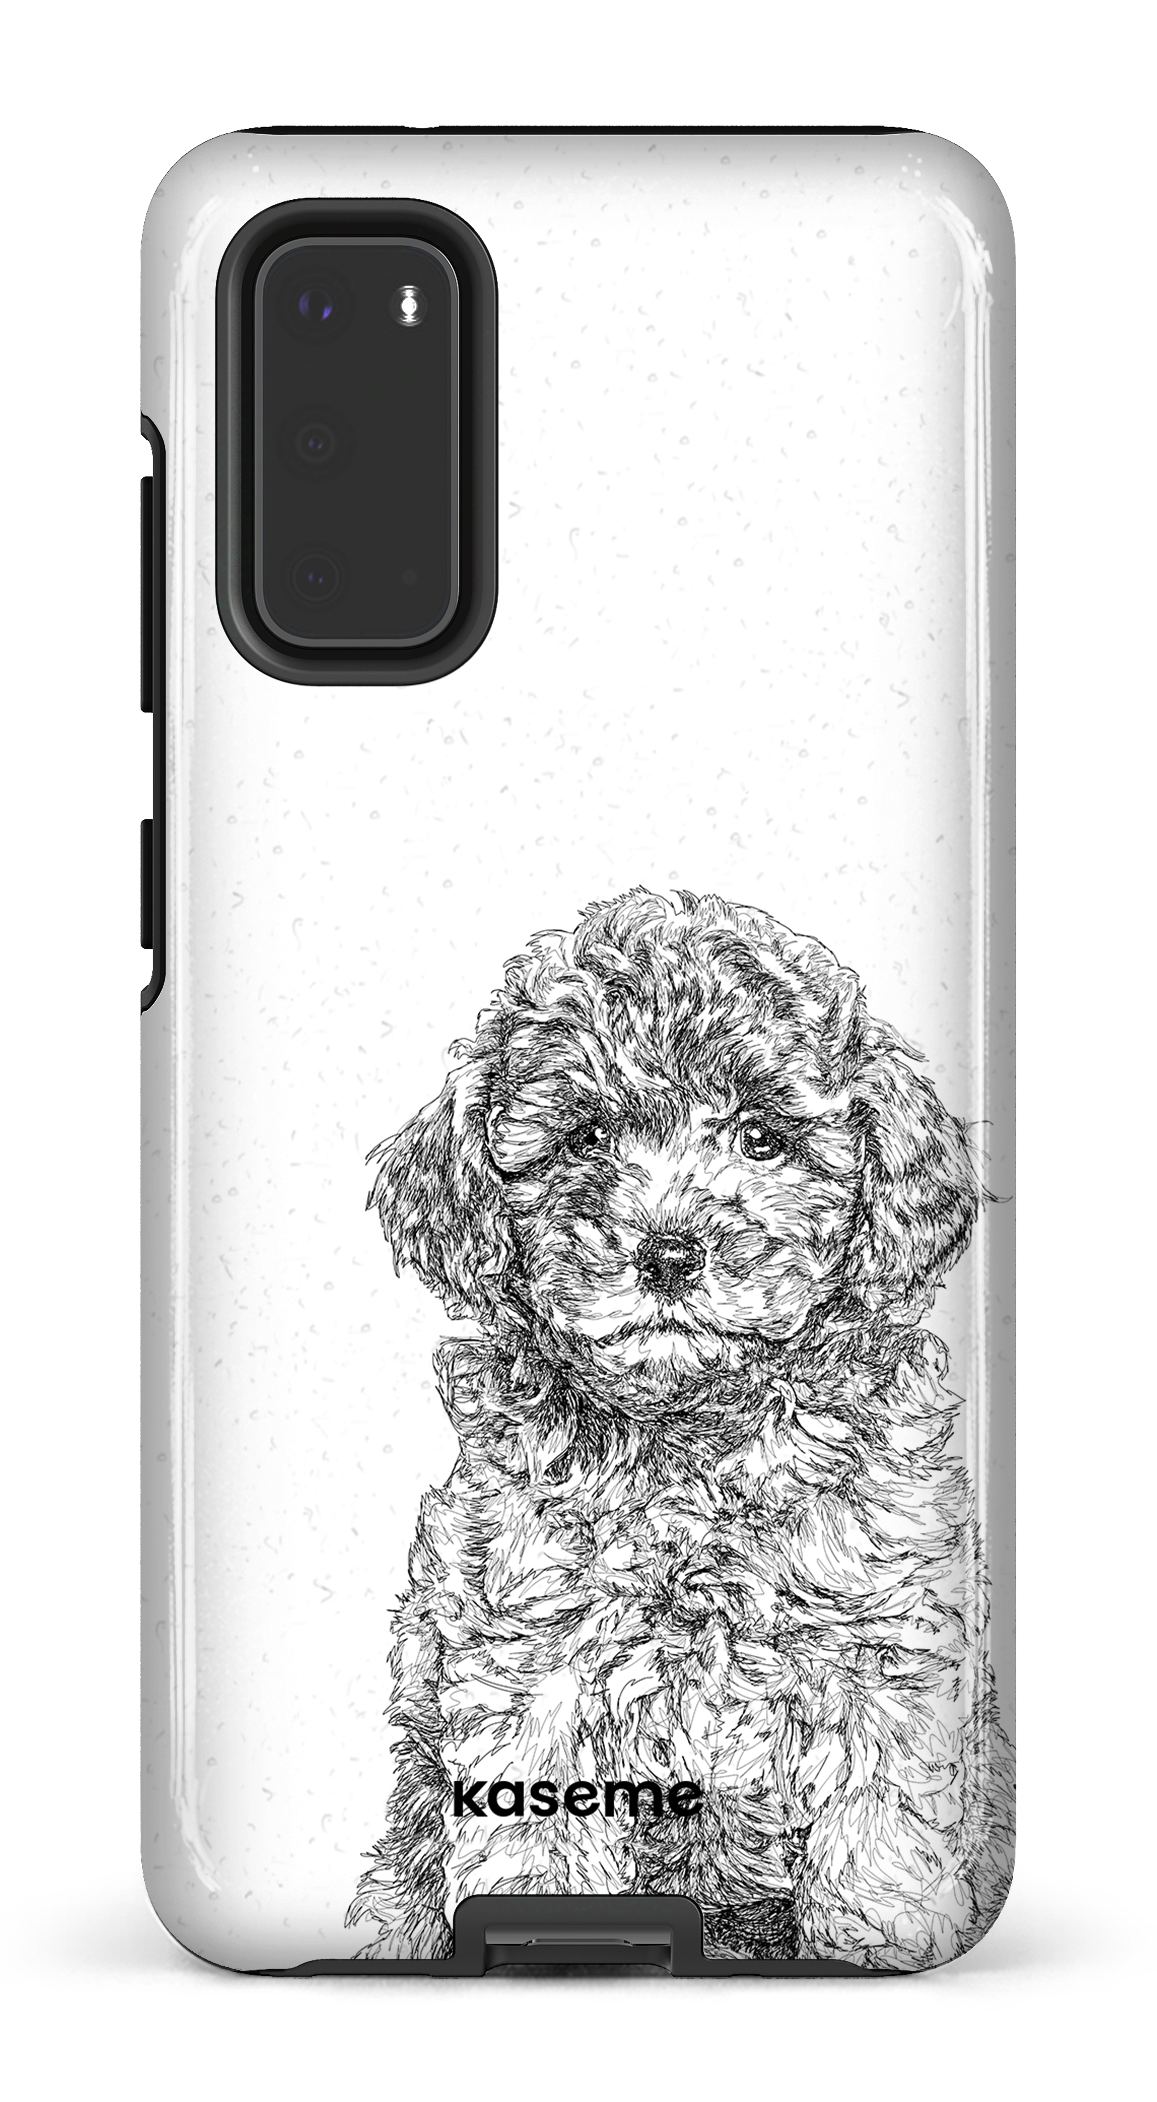 Toy Poodle - Galaxy S20